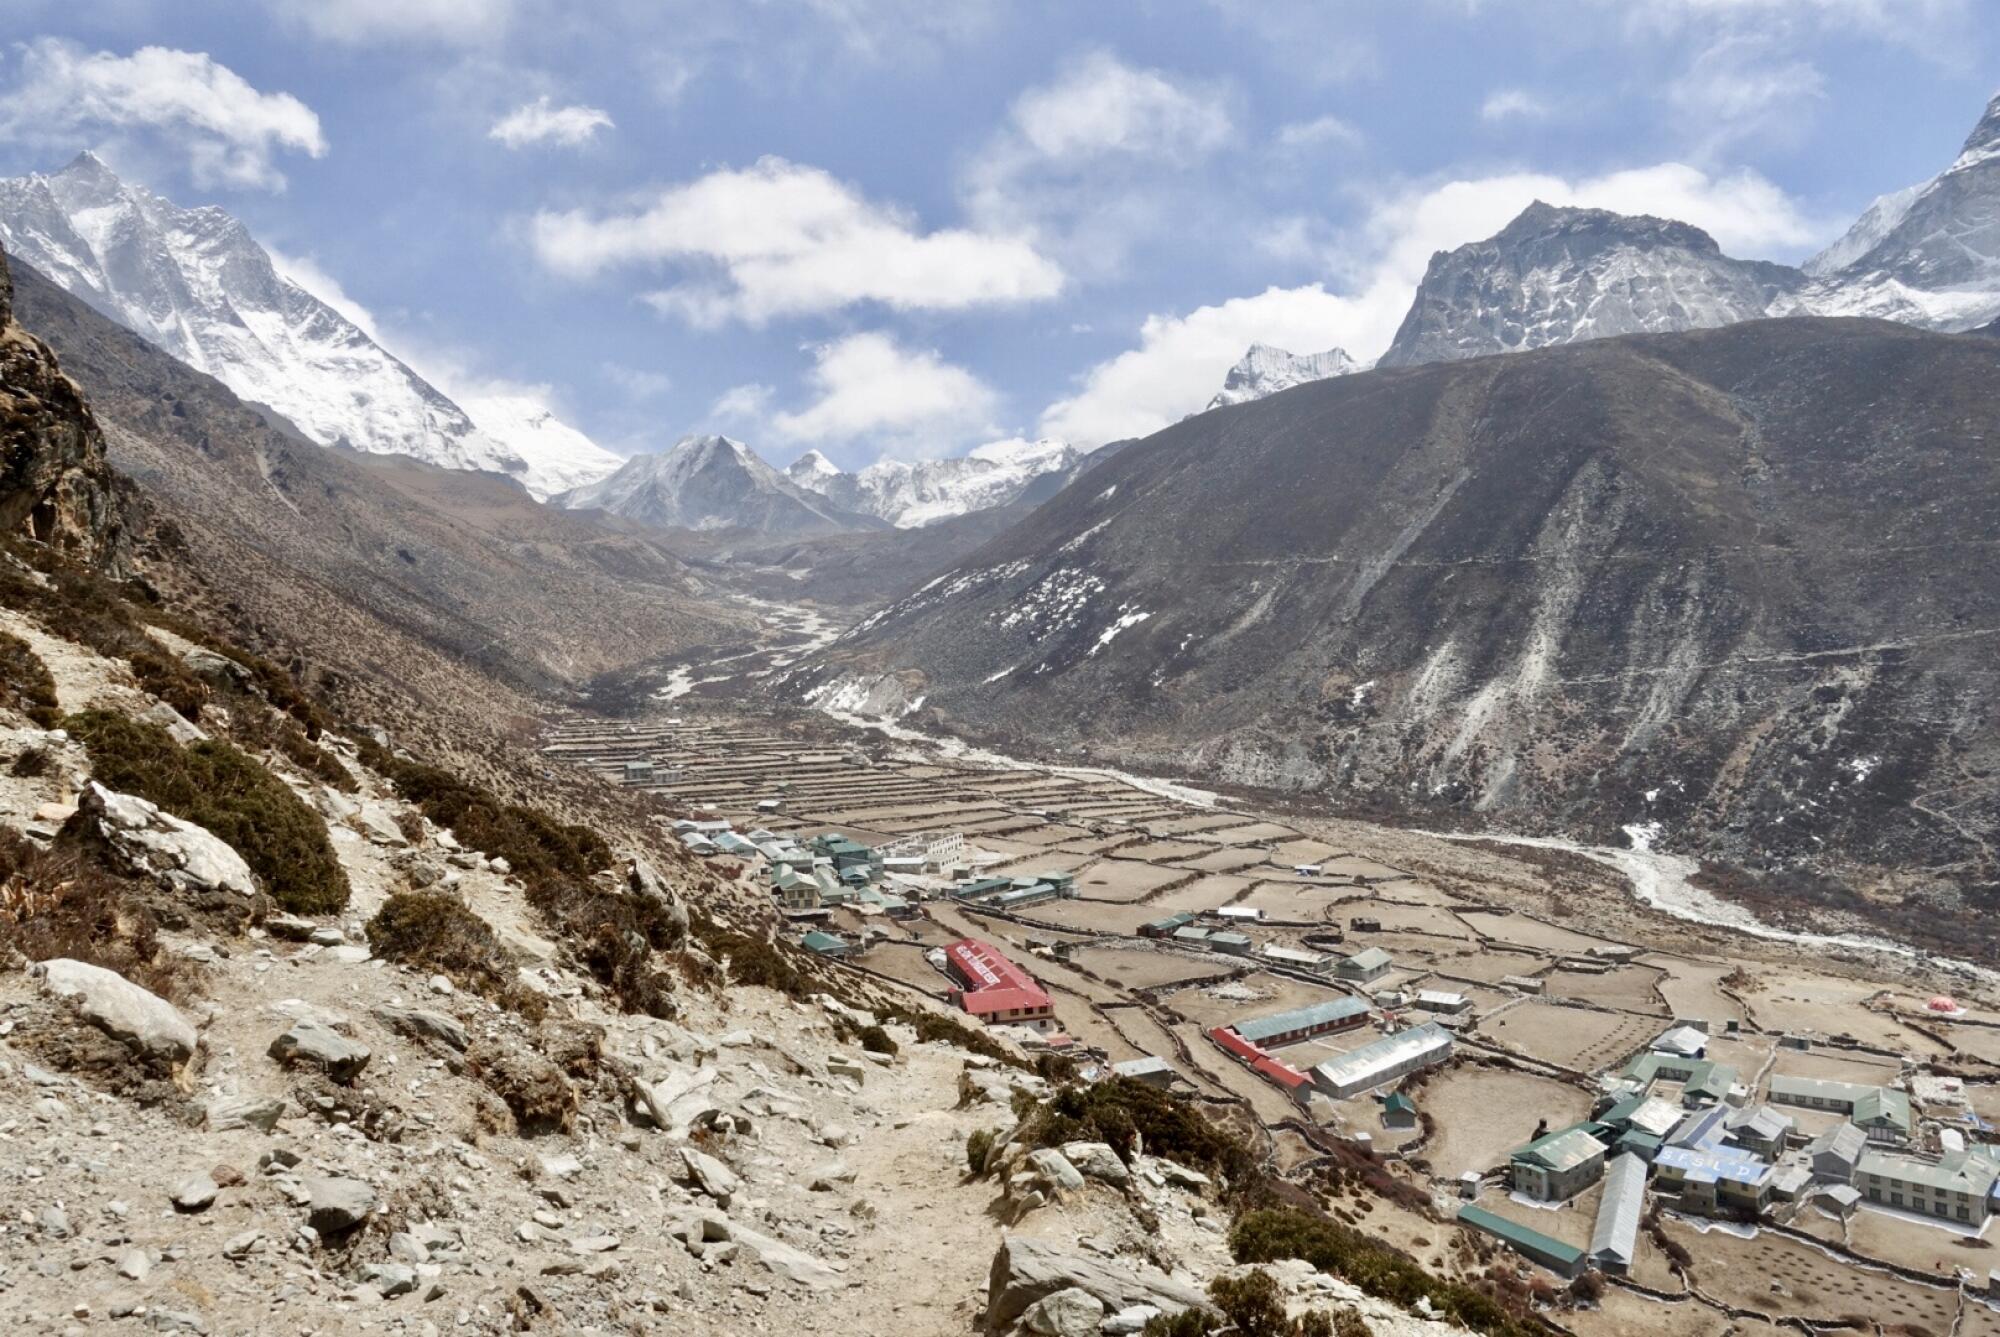 The village of Dingboche , between Namche Bazaar and Everest Base Camp